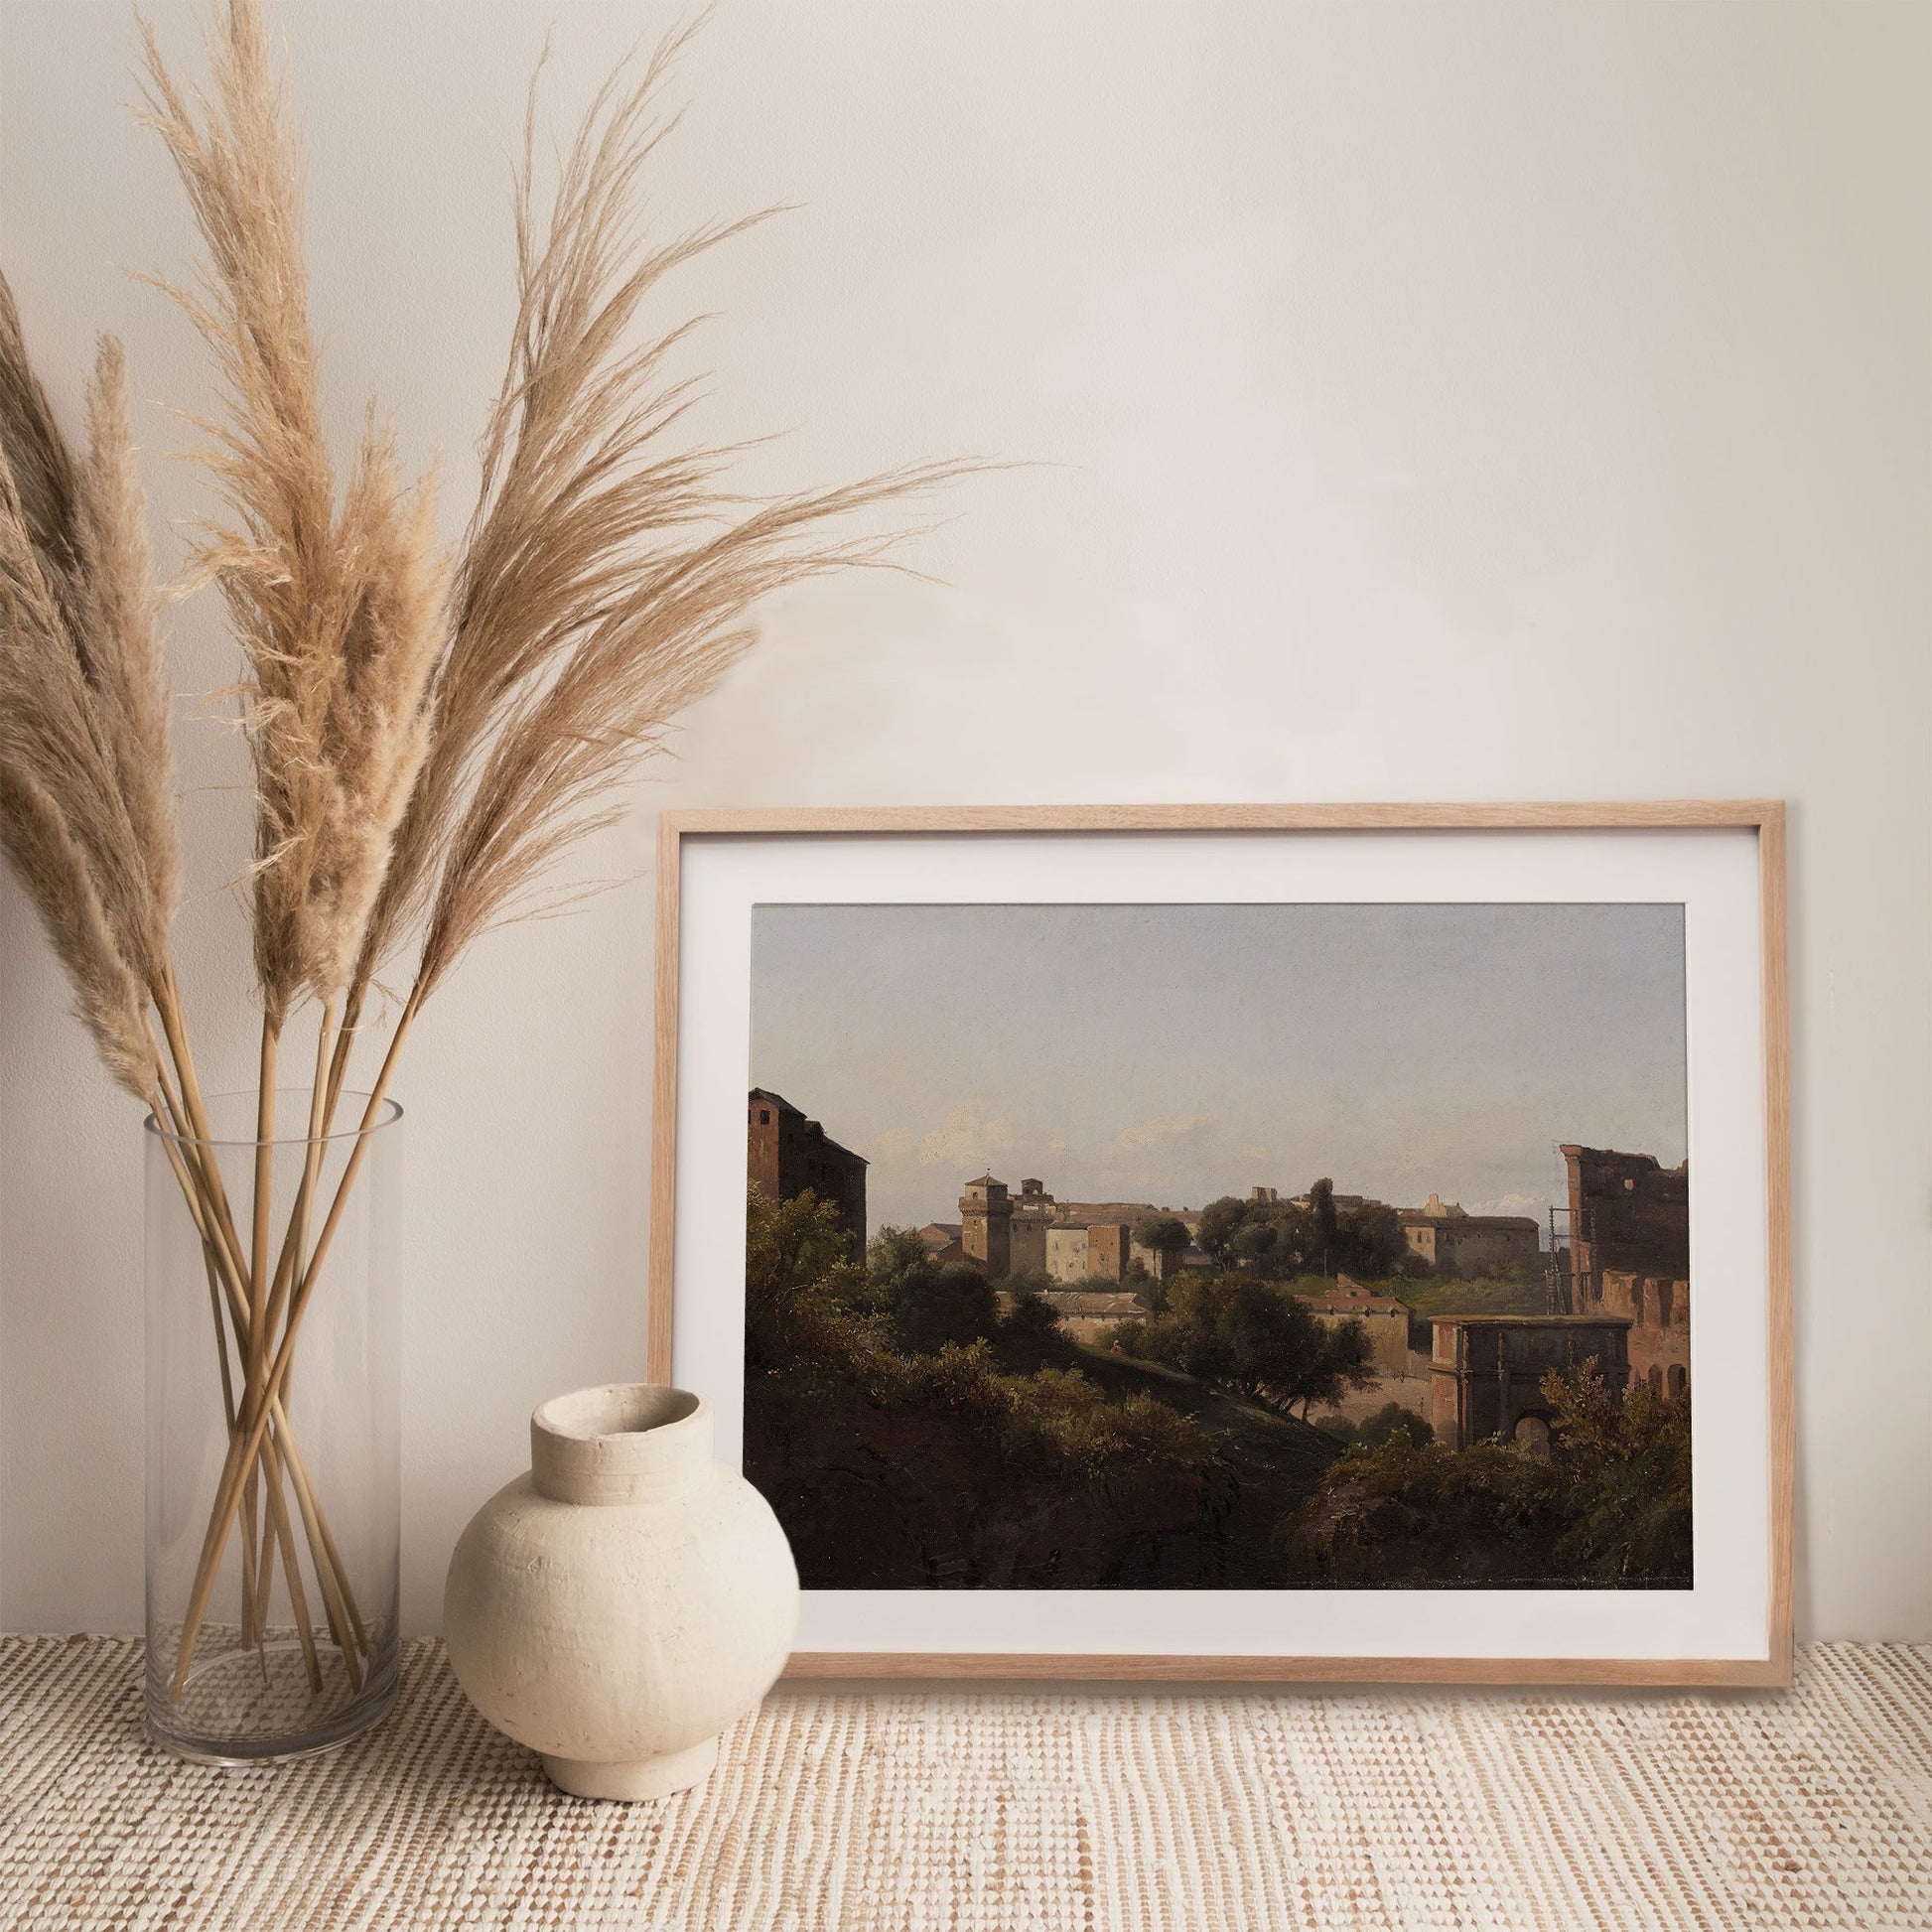 View of Ancient Rome - Vintage City Landscape Painting - Old Painting Replica - Greenery Landscape - Printed and Shipped to You